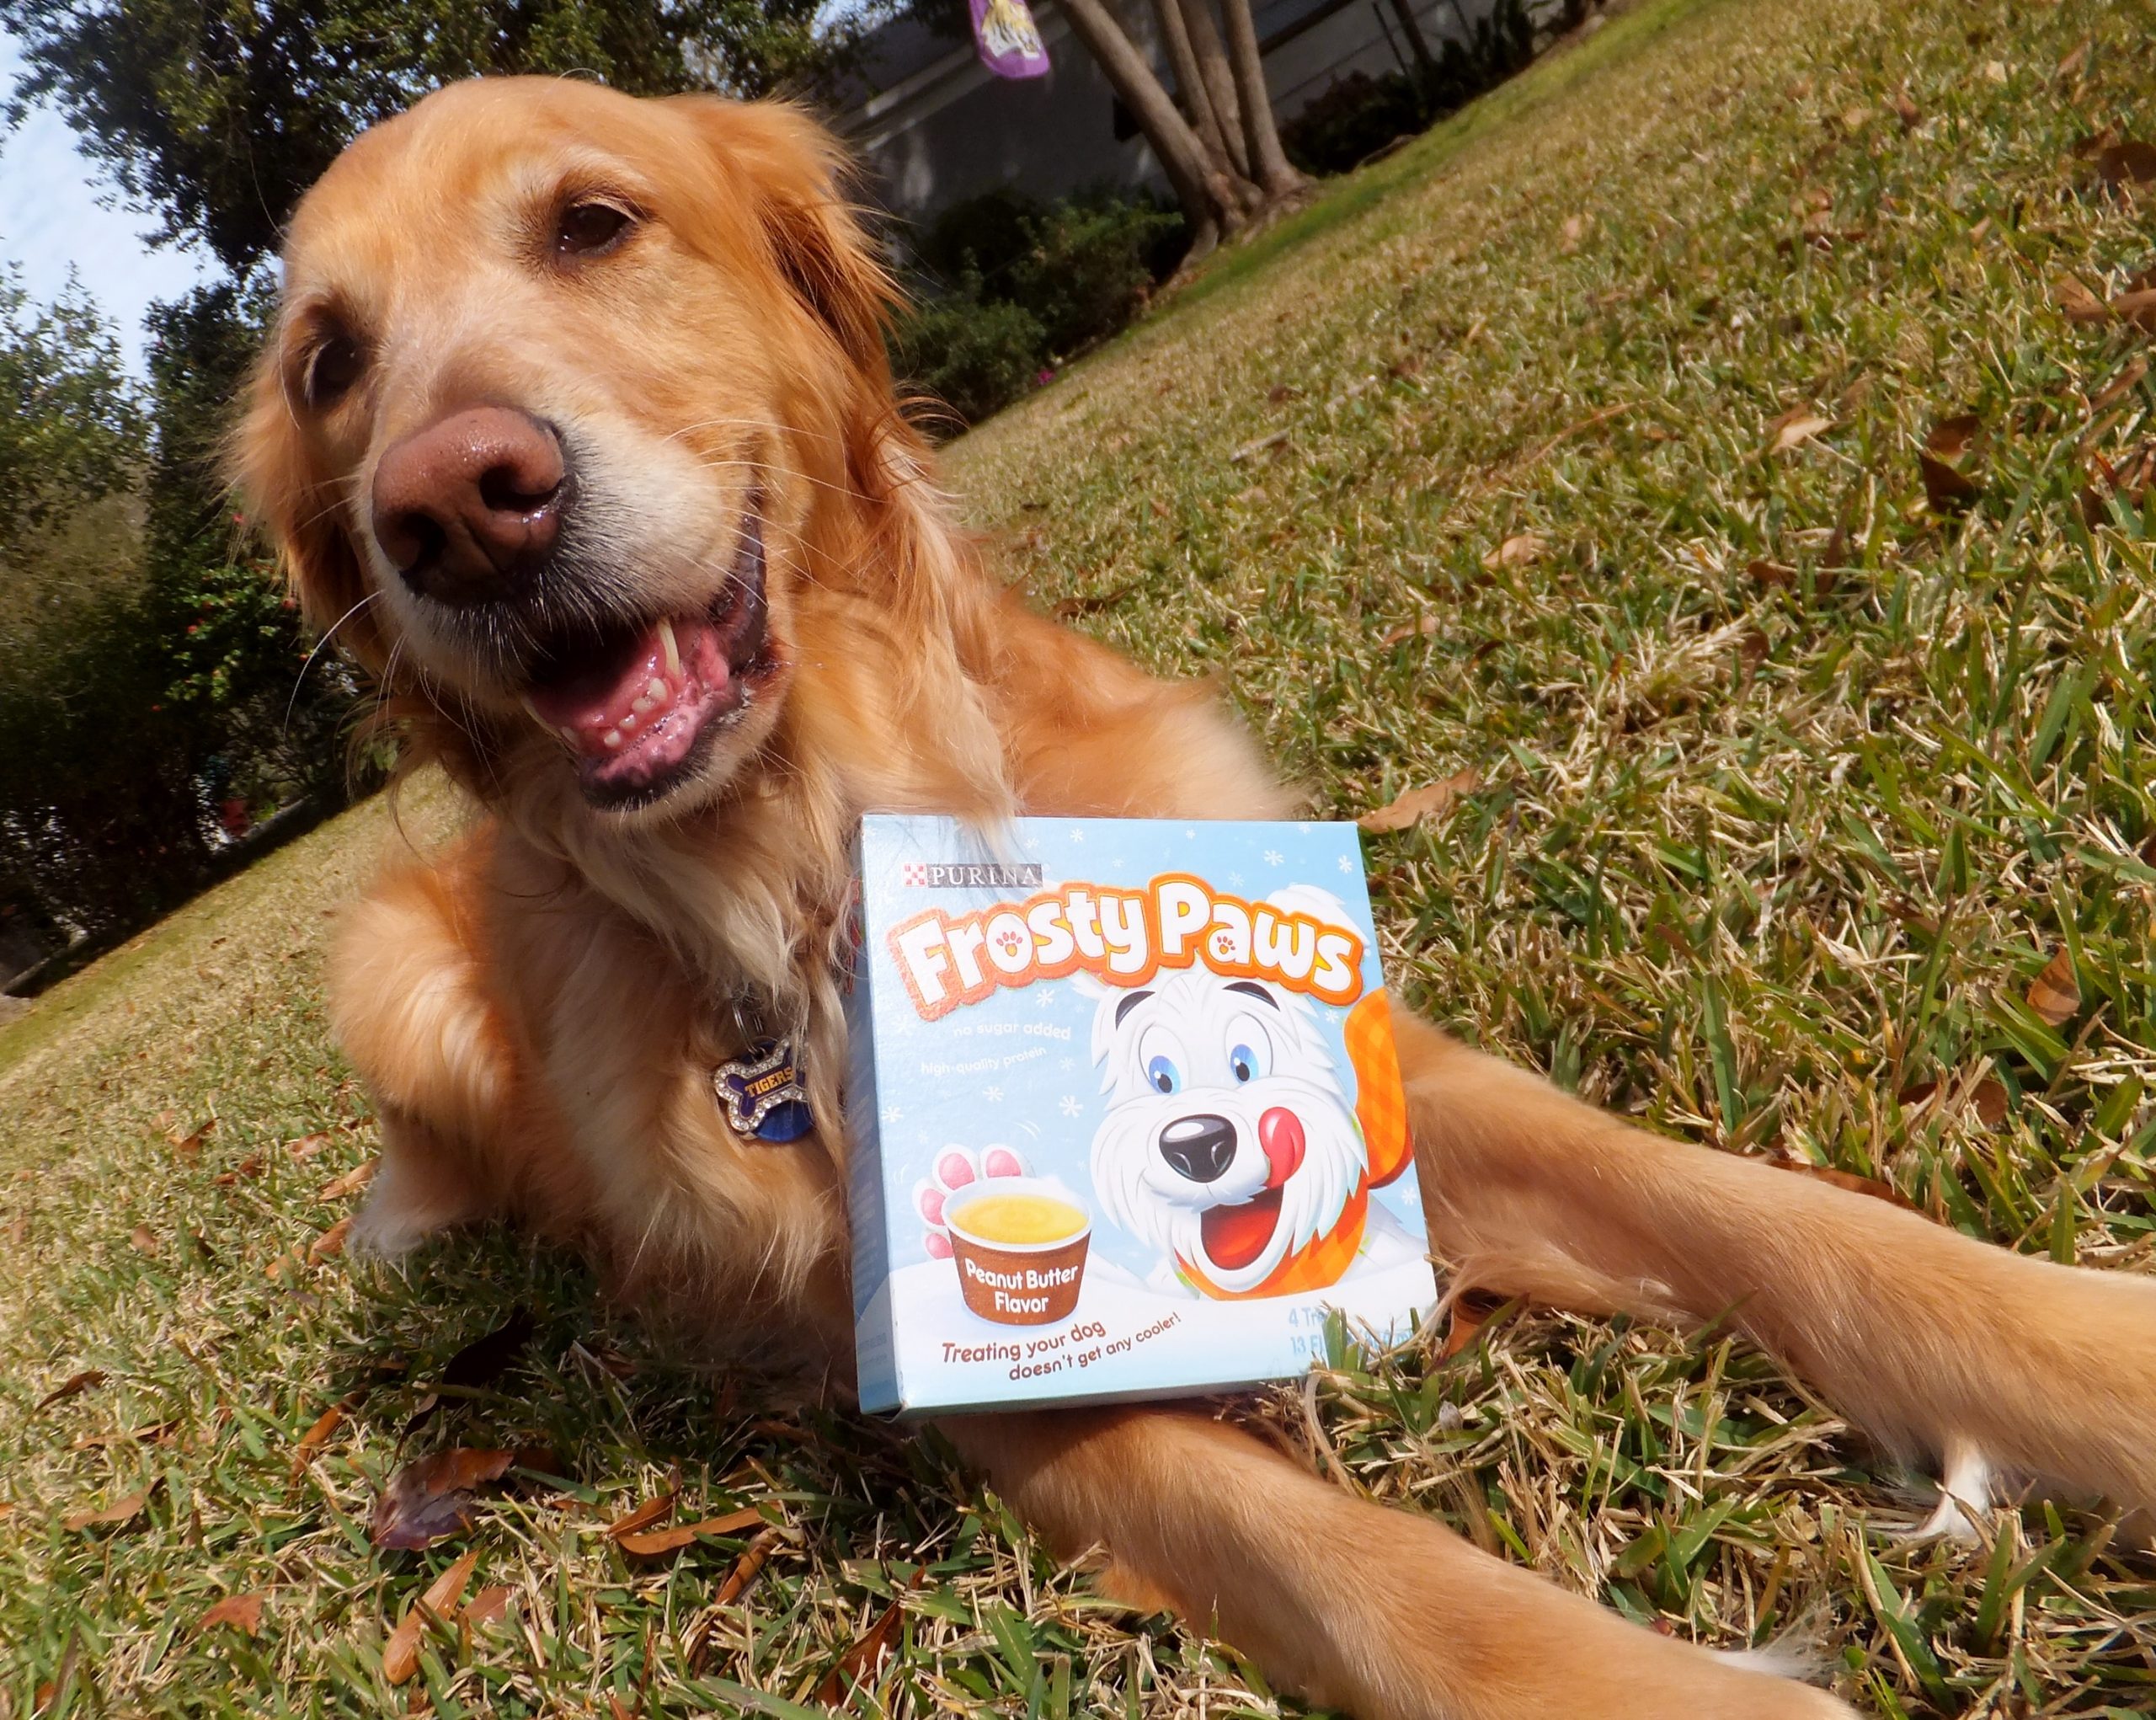 When To Avoid Giving Your Dog Frosty Paws